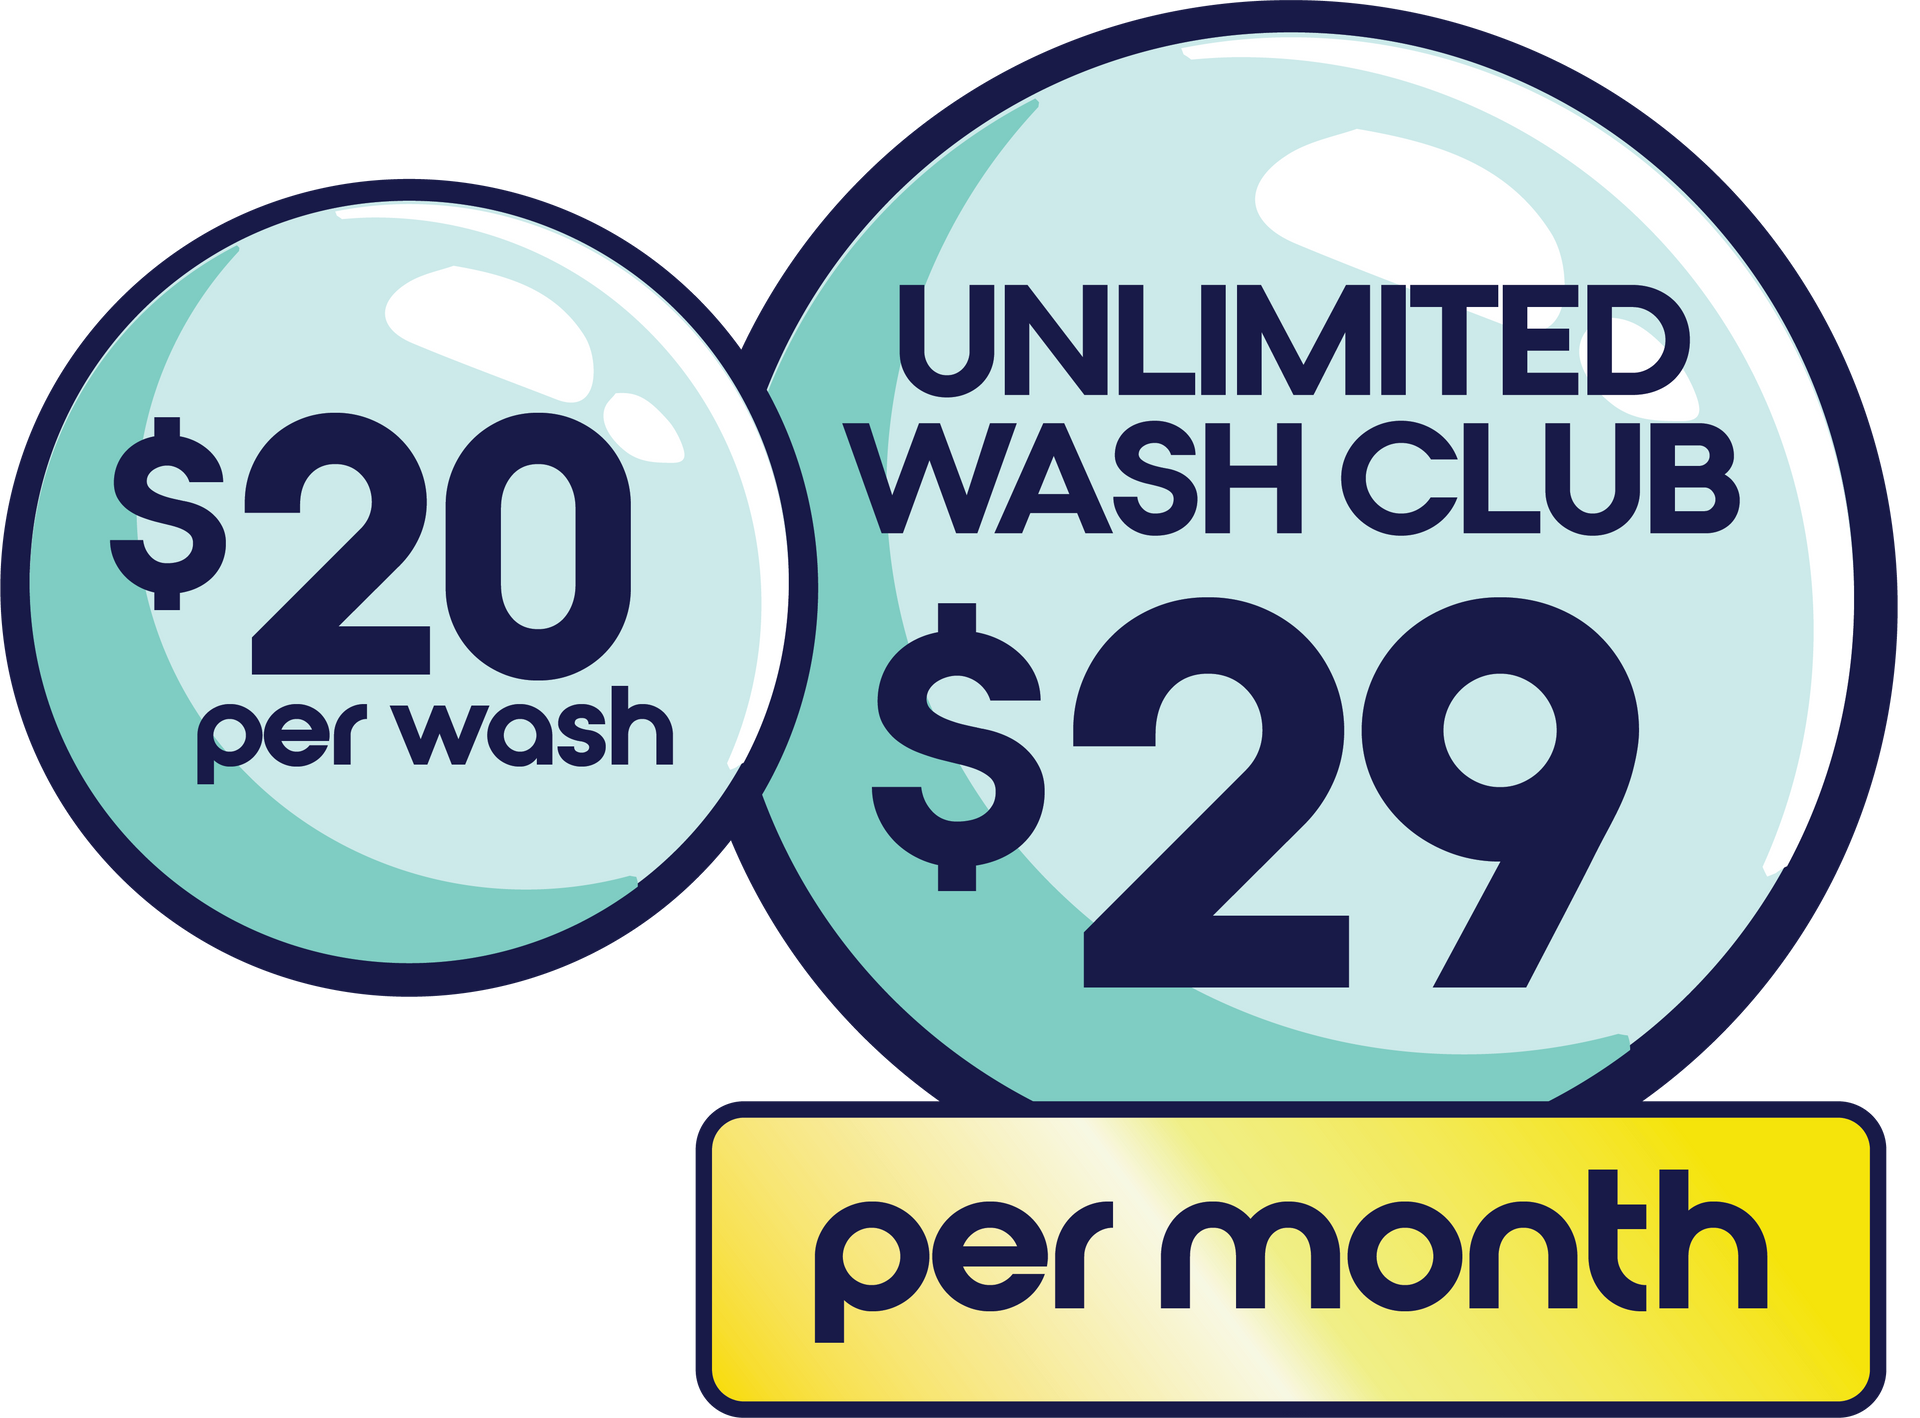 Unlimited car washes at Scrubs Express Wash for $36/ month